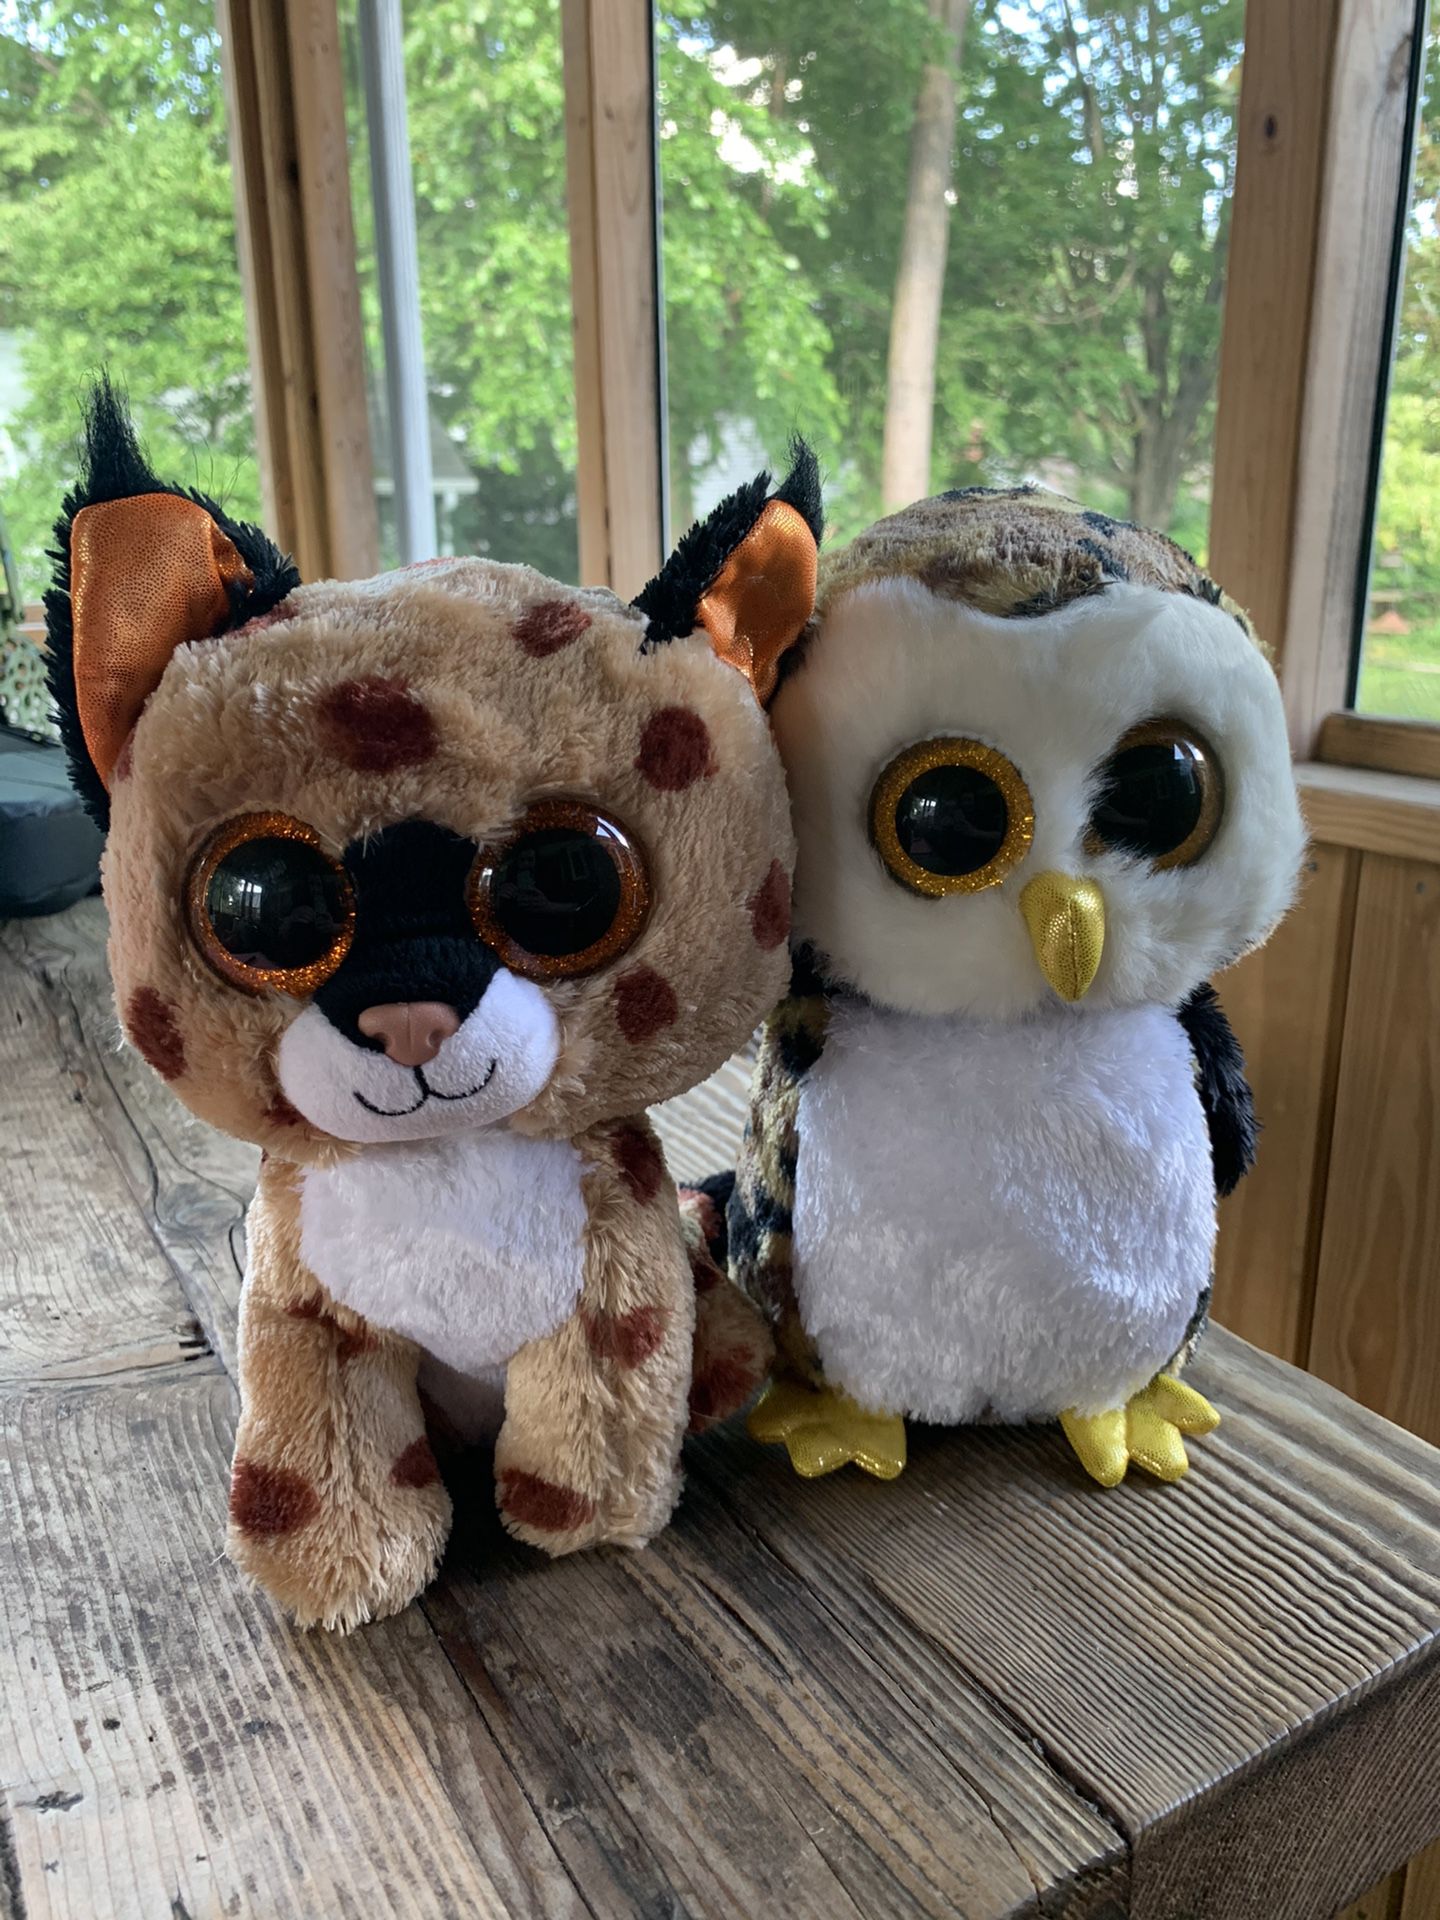 Two Ty Beanie Boos in excellent condition